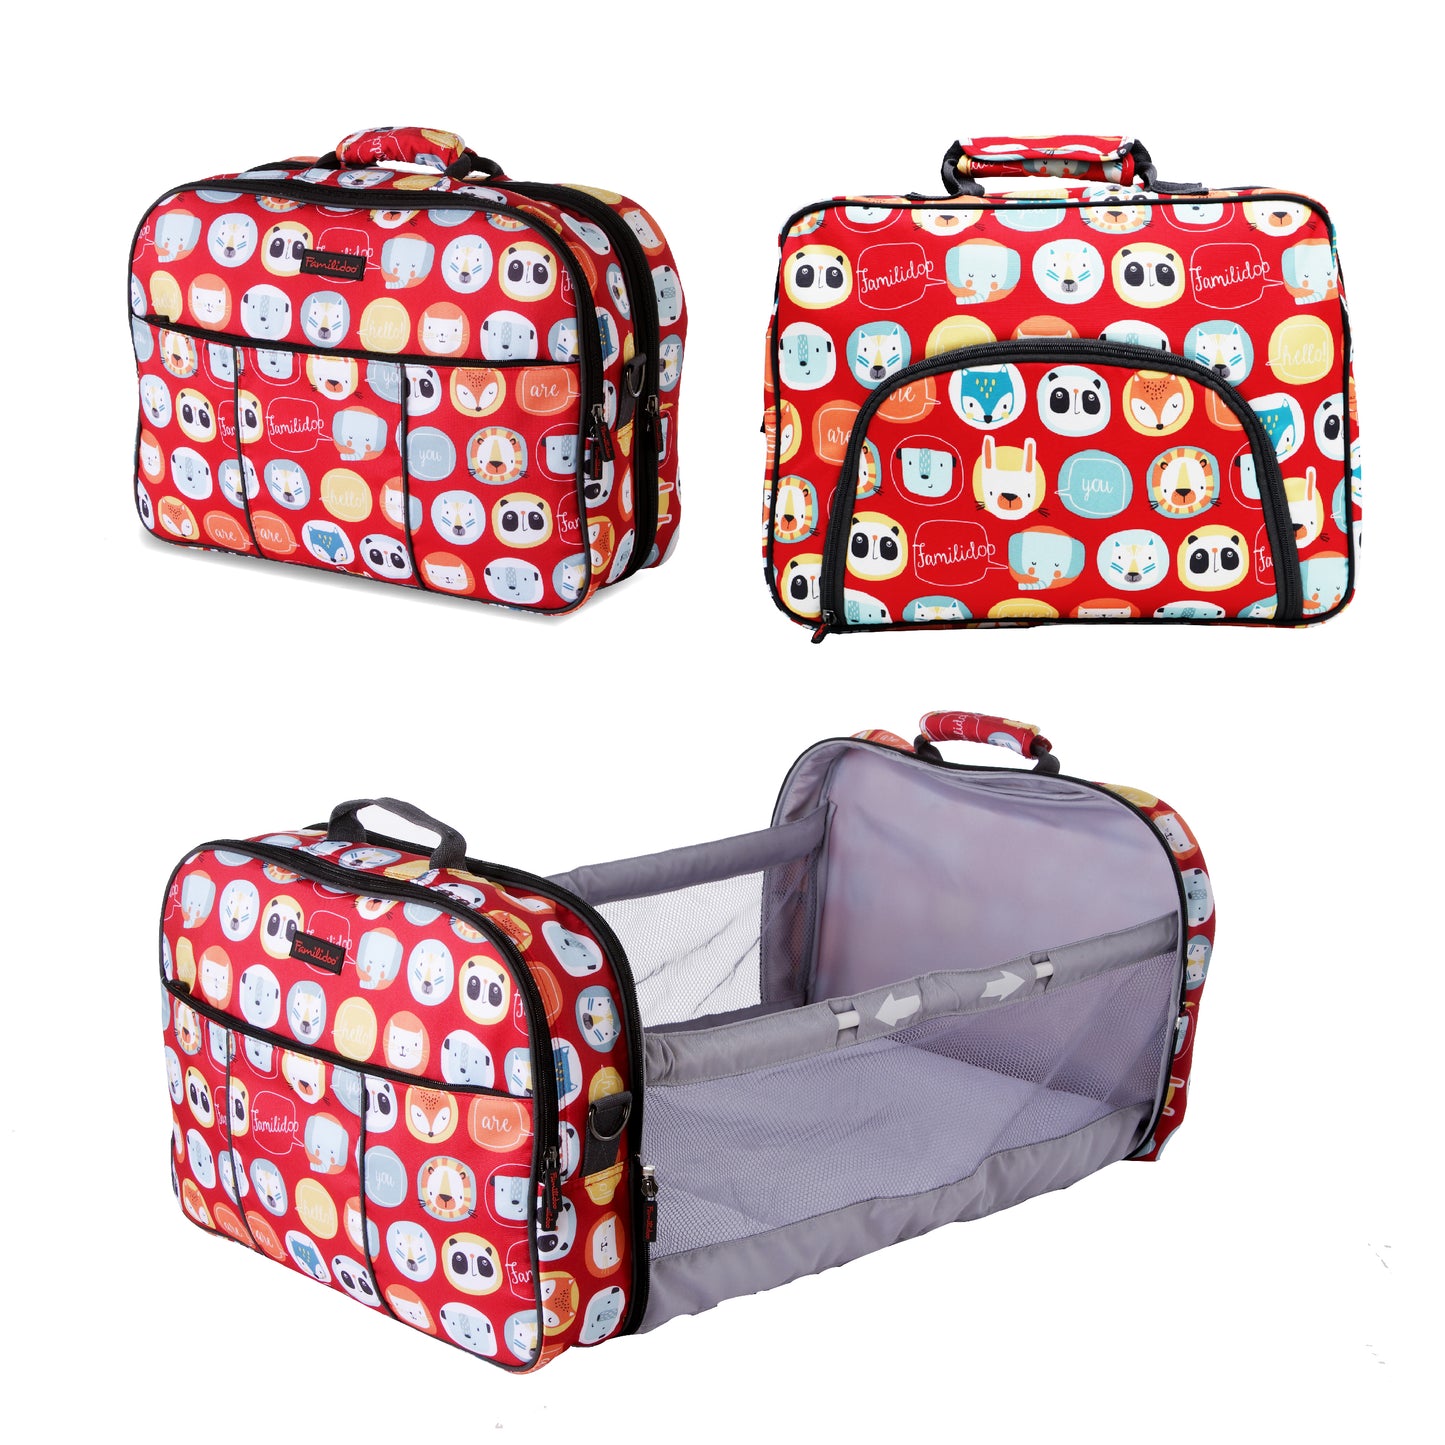 Travel Cot 2in1 Diaper Bag red color